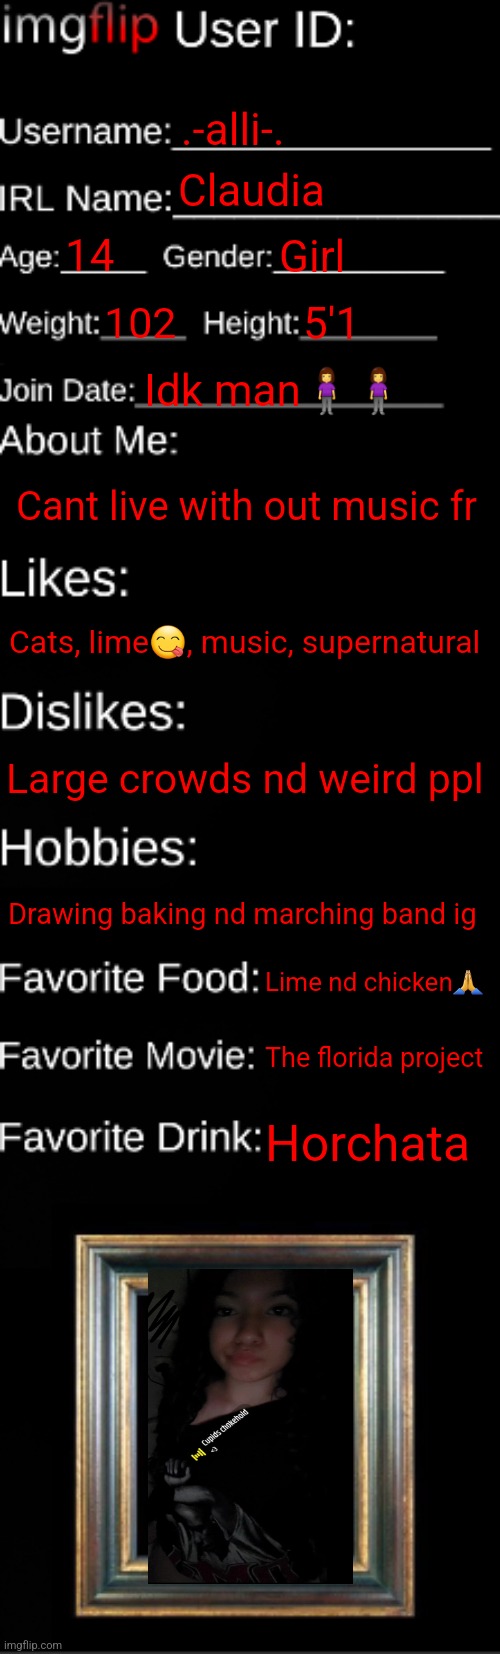 Yur | .-alli-. Claudia; 14; Girl; 102; 5'1; Idk man🧍‍♀️🧍‍♀️; Cant live with out music fr; Cats, lime😋, music, supernatural; Large crowds nd weird ppl; Drawing baking nd marching band ig; Lime nd chicken🙏; The florida project; Horchata | image tagged in imgflip id card | made w/ Imgflip meme maker